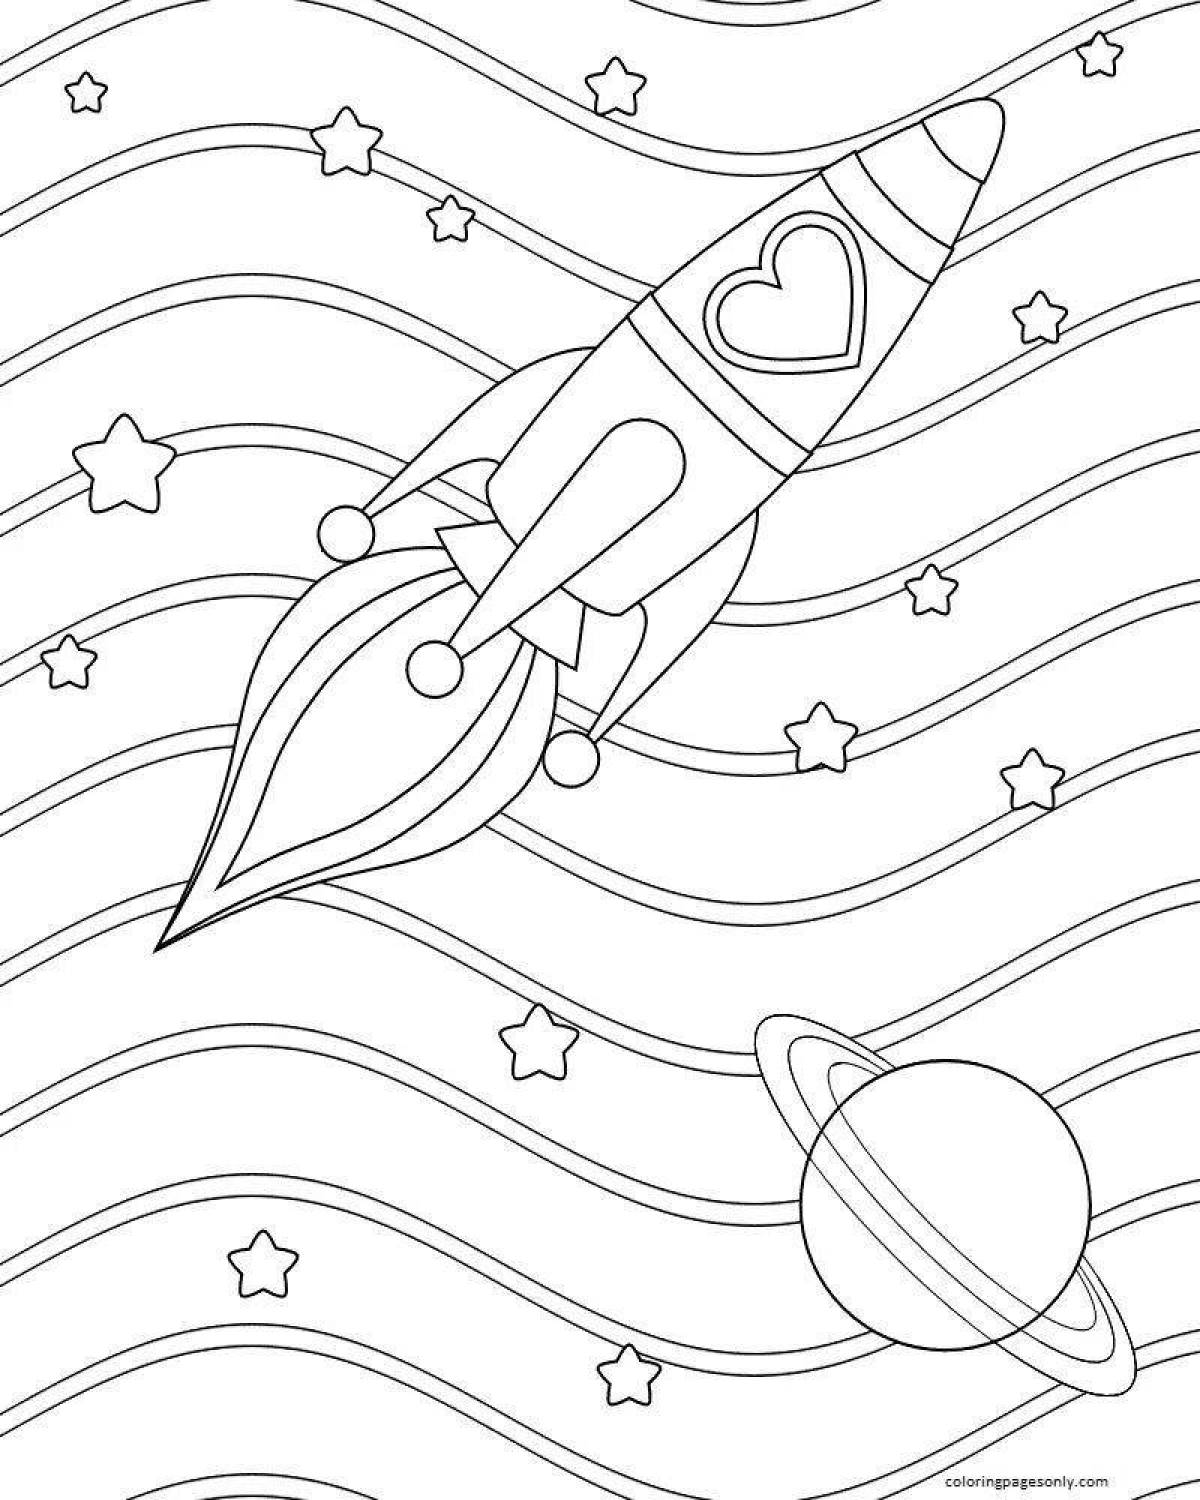 Playful space coloring game